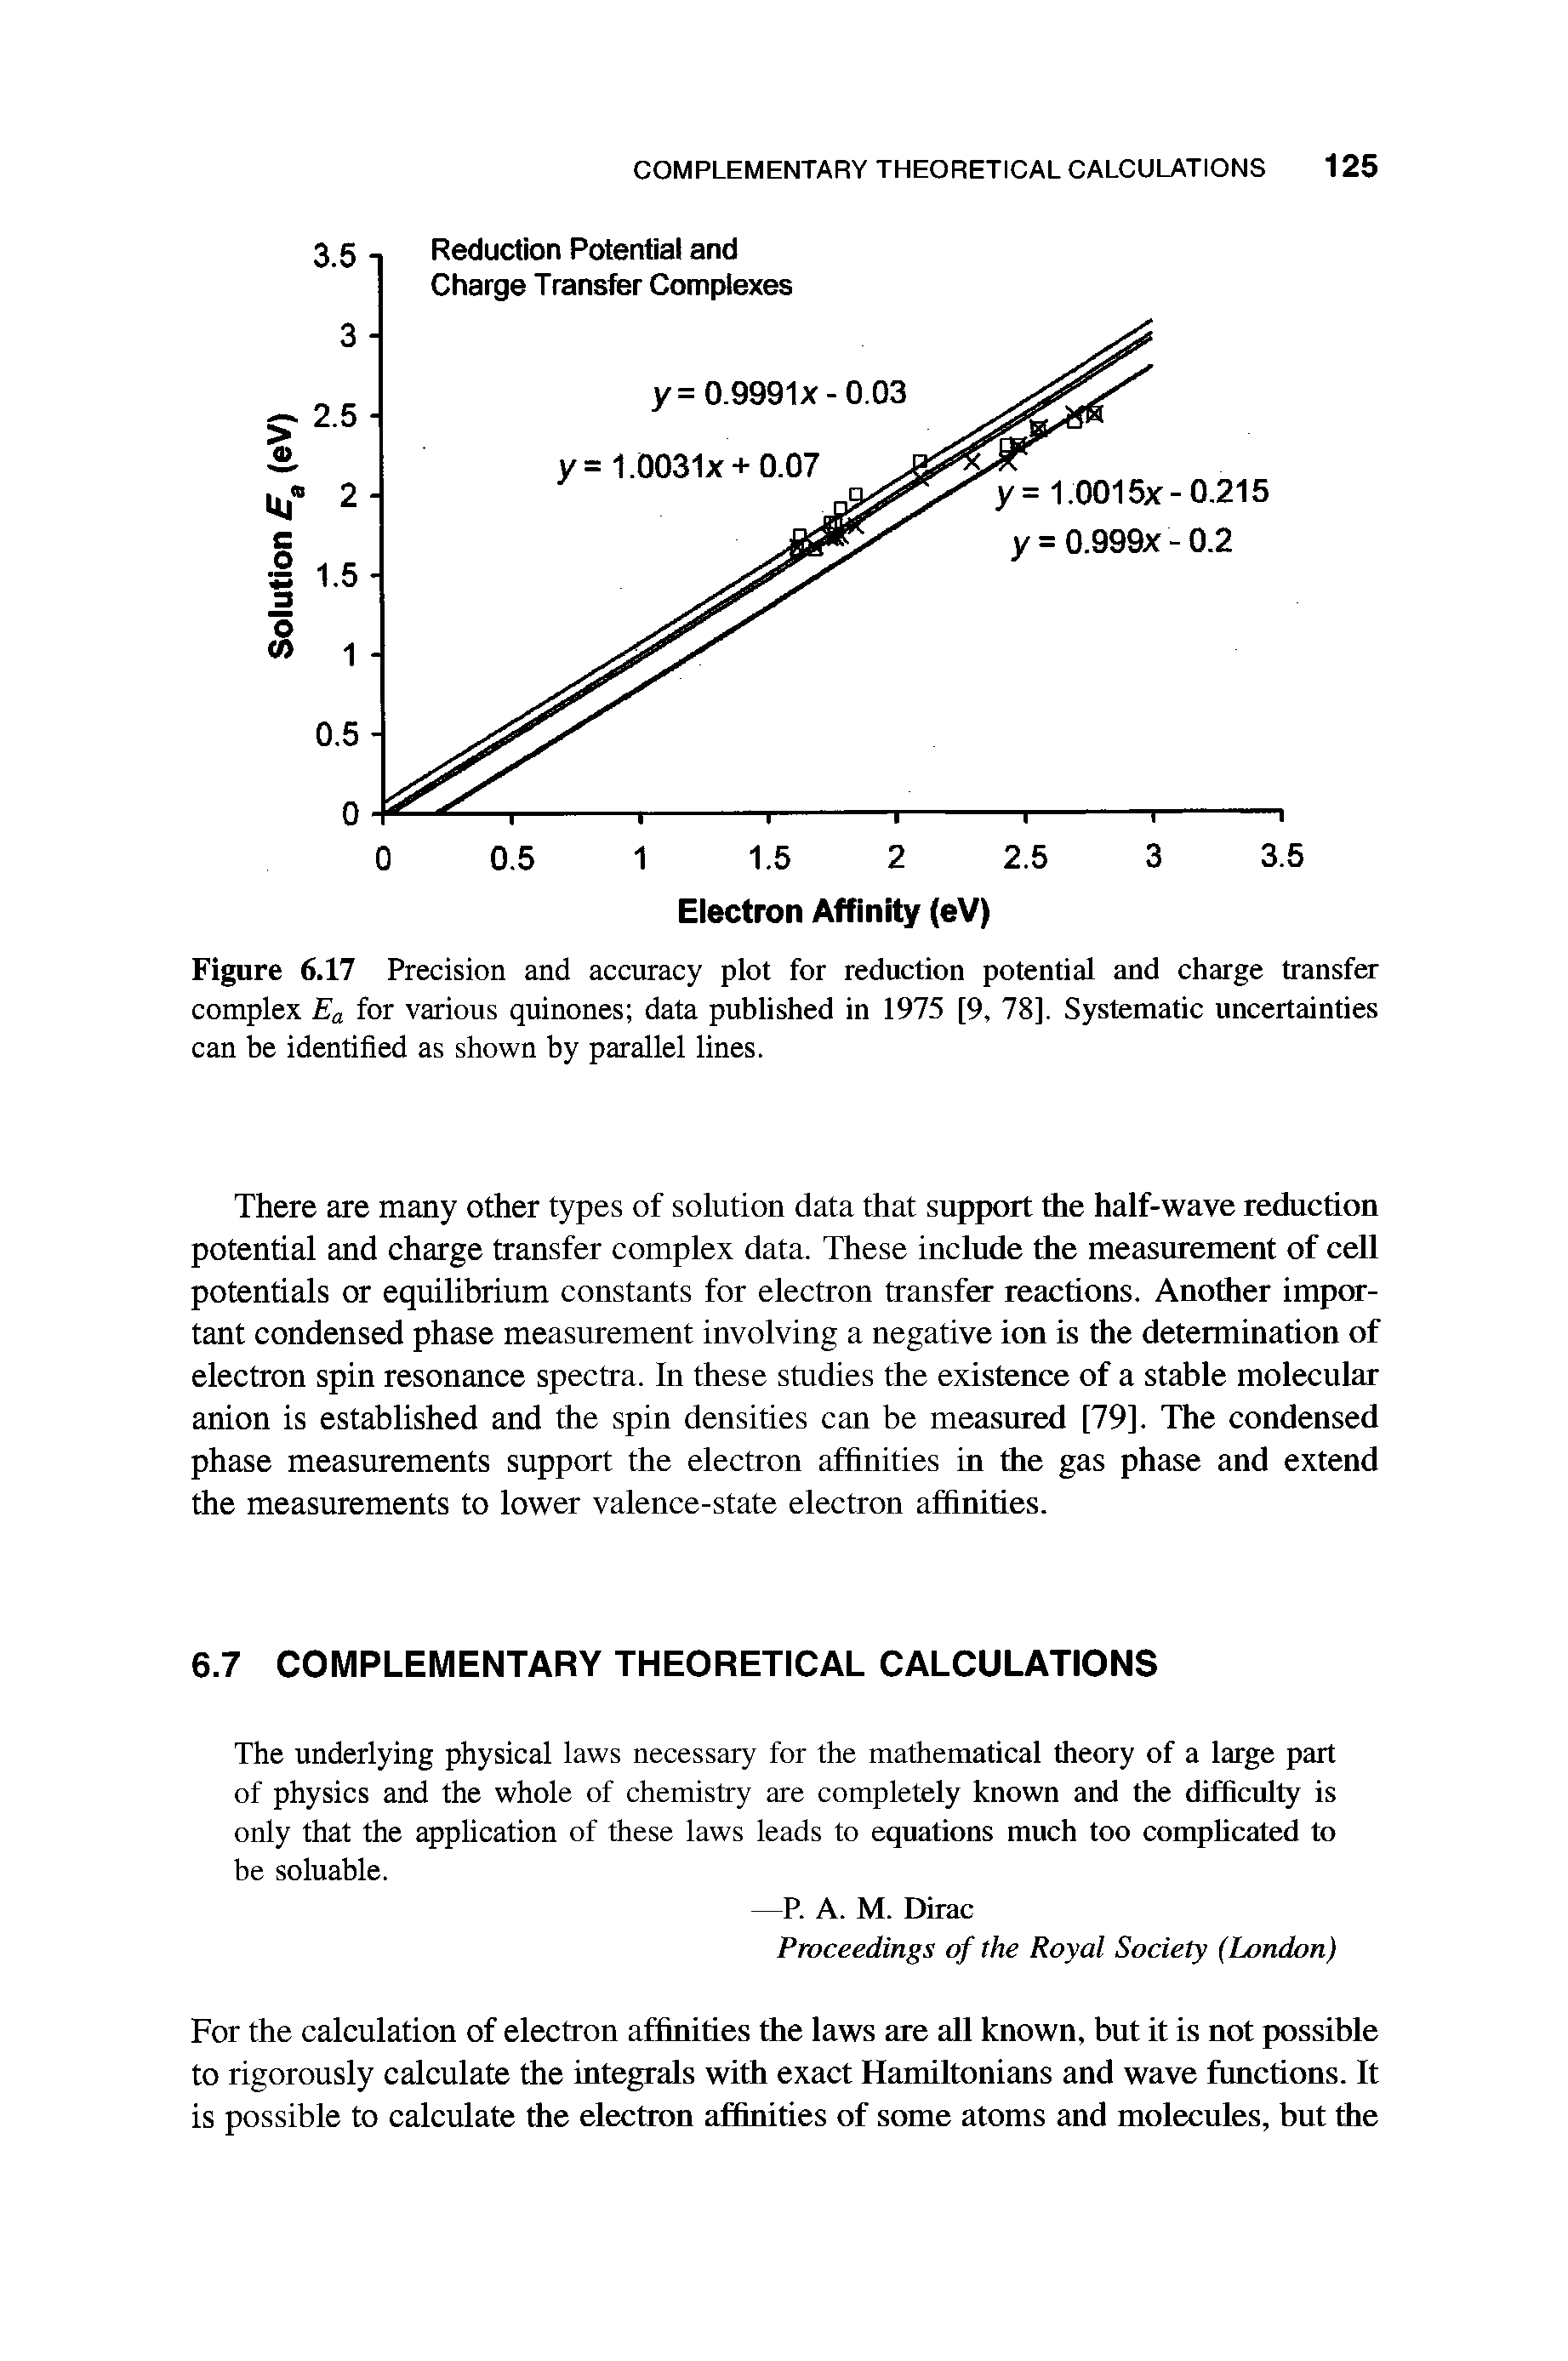 Figure 6.17 Precision and accuracy plot for reduction potential and charge transfer complex Ea for various quinones data published in 1975 [9, 78]. Systematic uncertainties can be identified as shown by parallel lines.